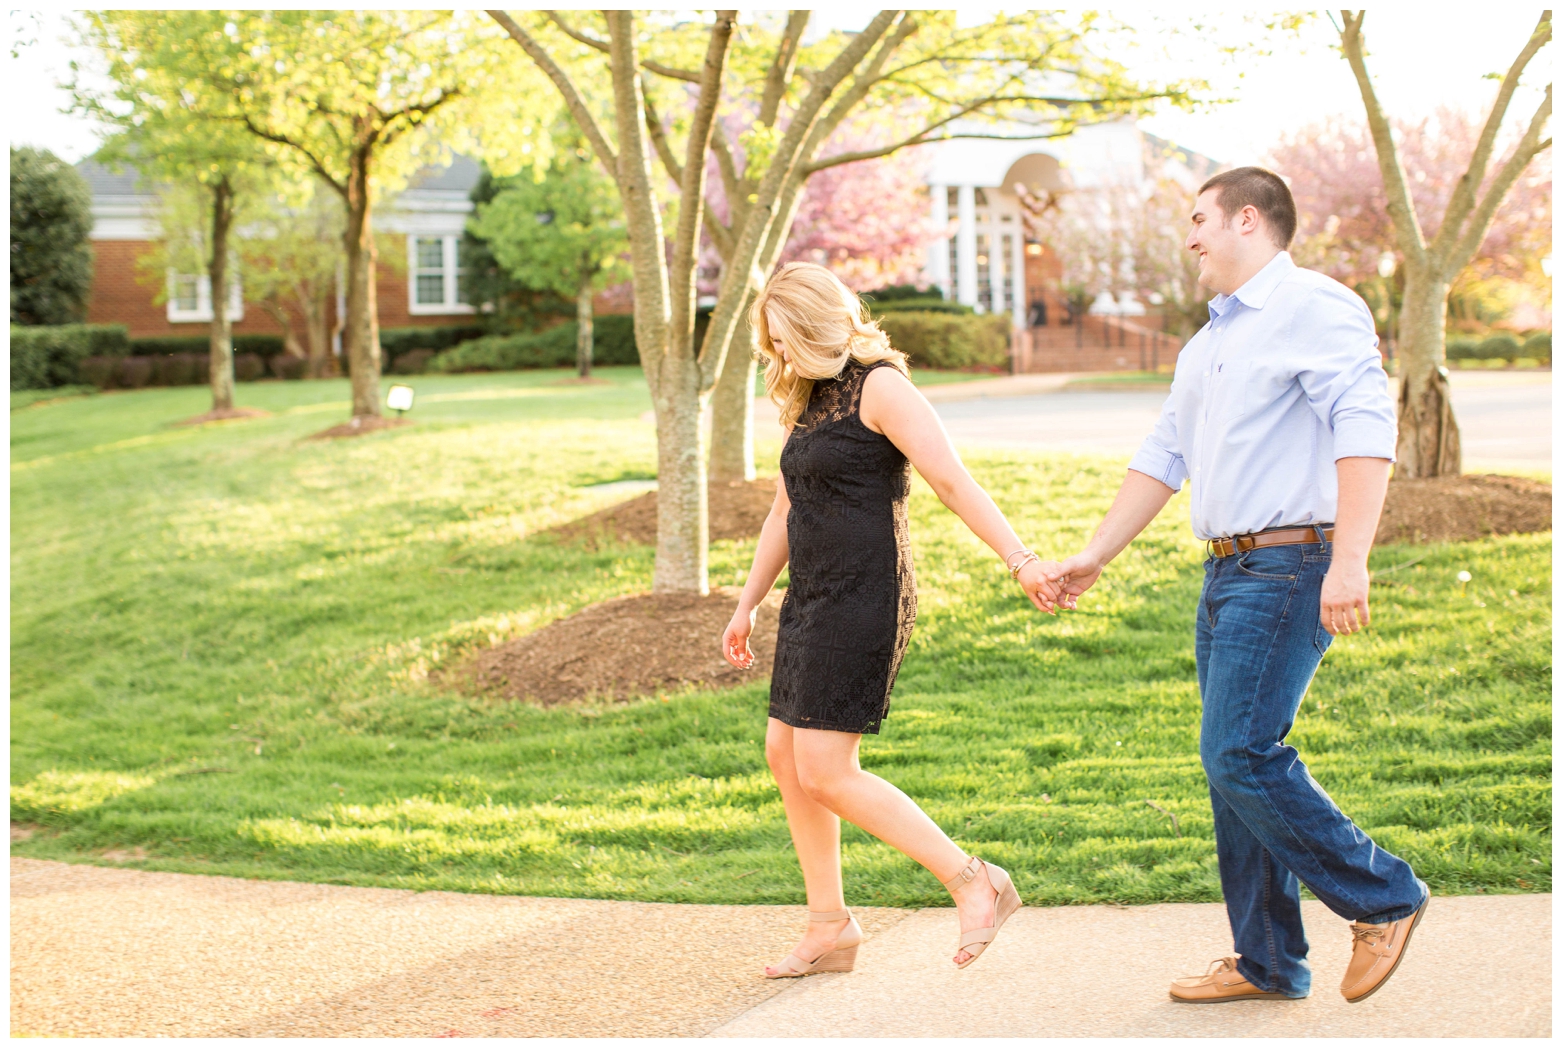 View More: http://hopetaylorphotographyphotos.pass.us/meagan-and-justin-engagement